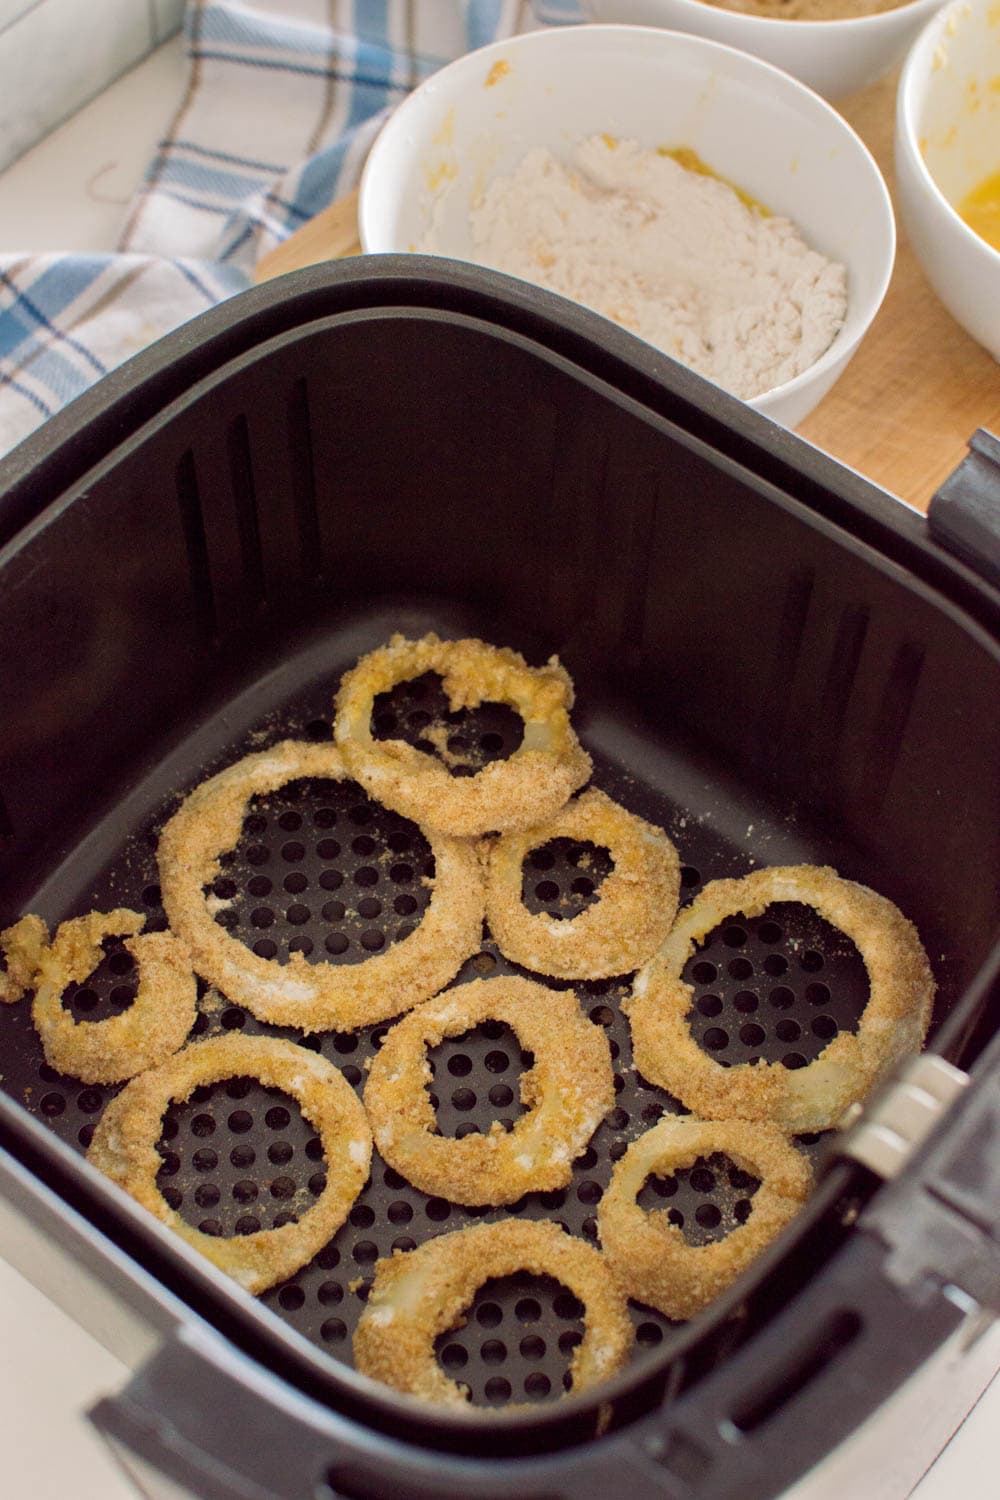 Homemade onion rings ready to be baked in the air fryer